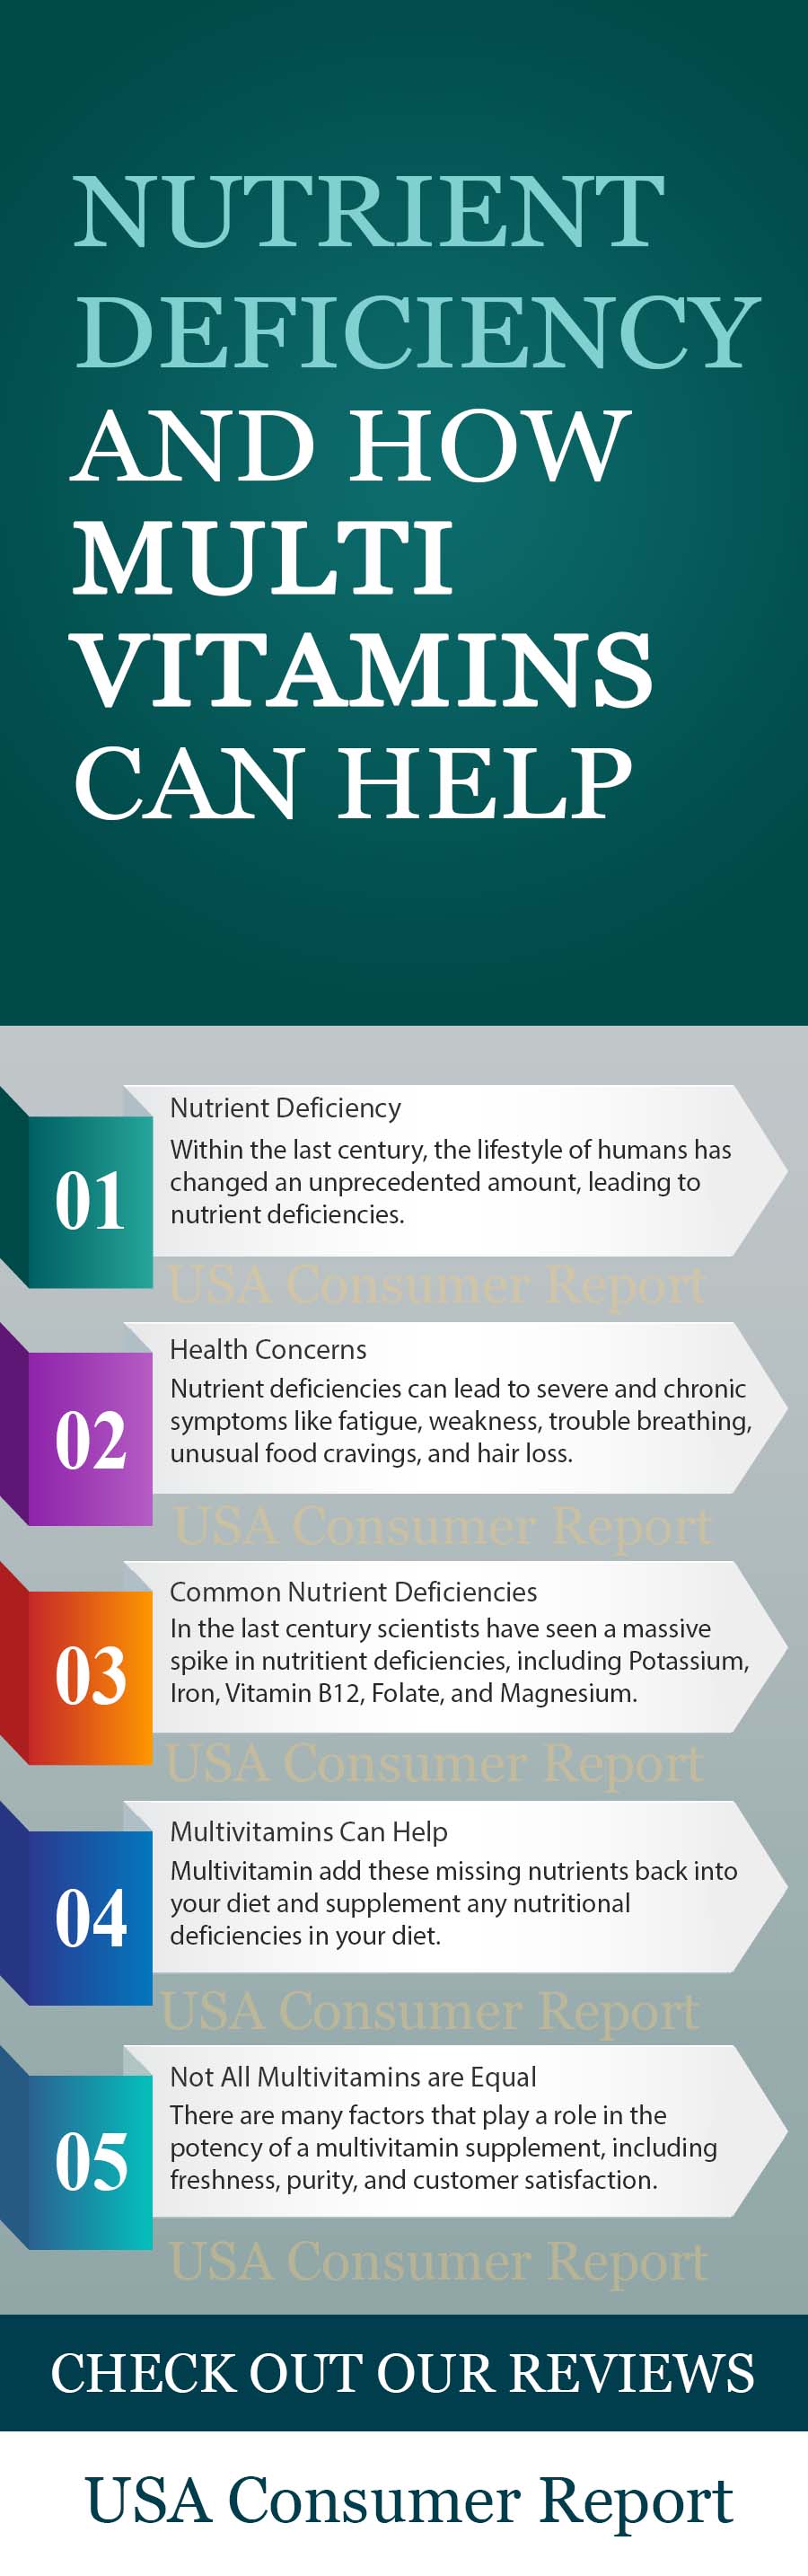 Infographic on nutrient deficiency and how multivitamins can help